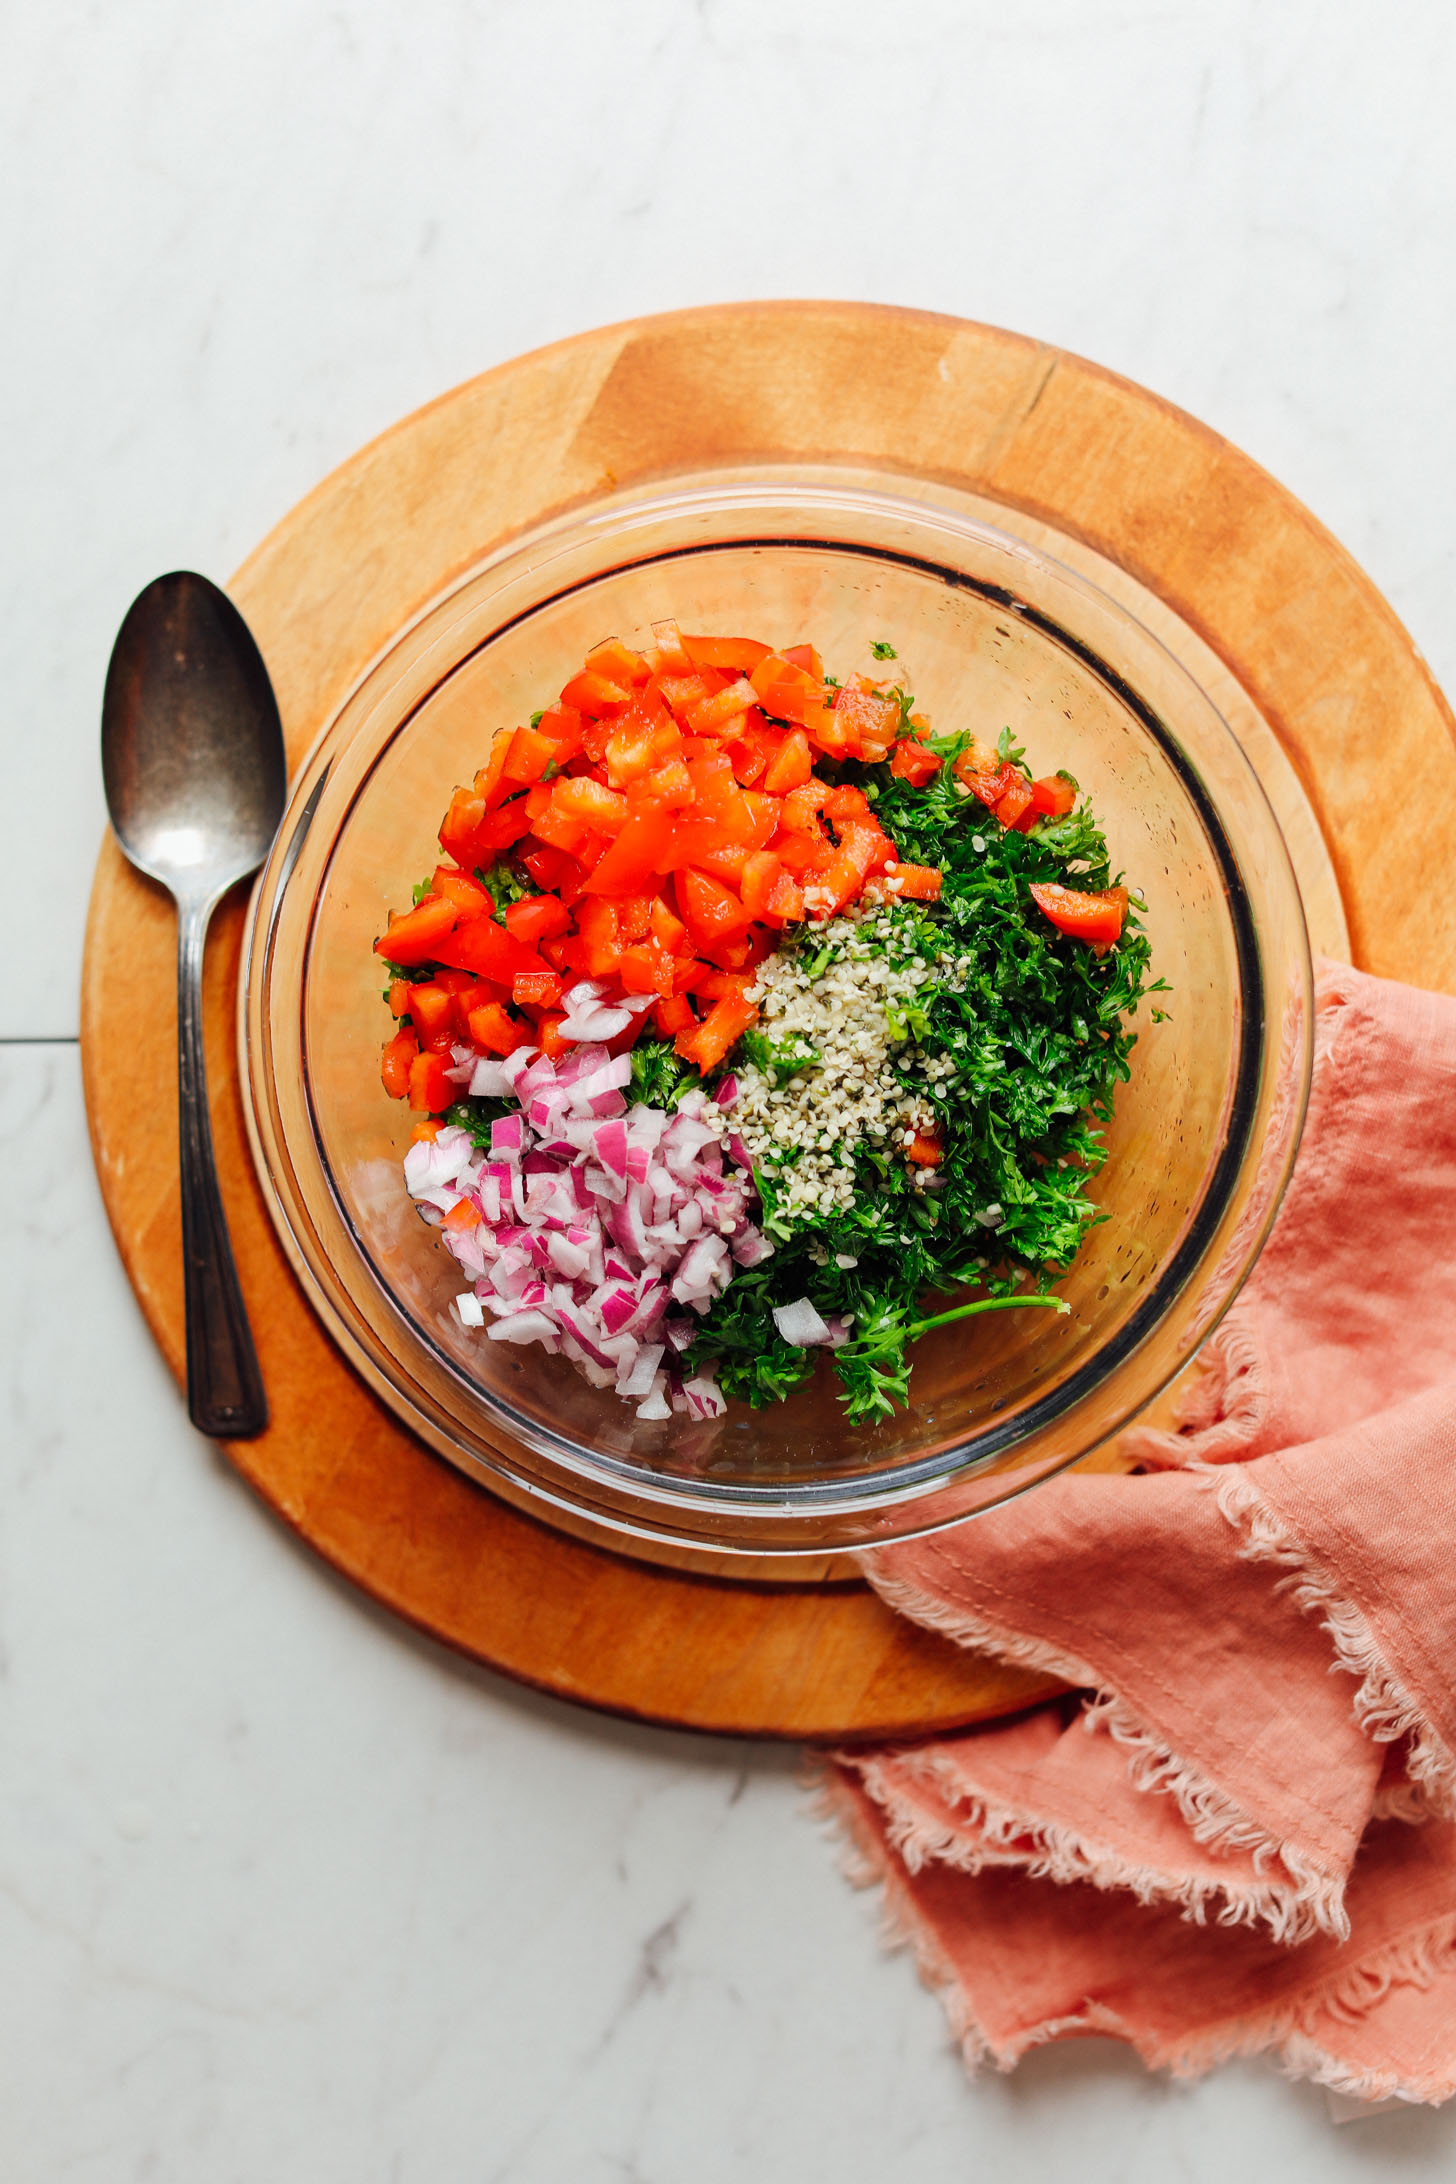 Mixing together ingredients for red pepper hemp tabbouleh to go in our Vegan Greek Bowl